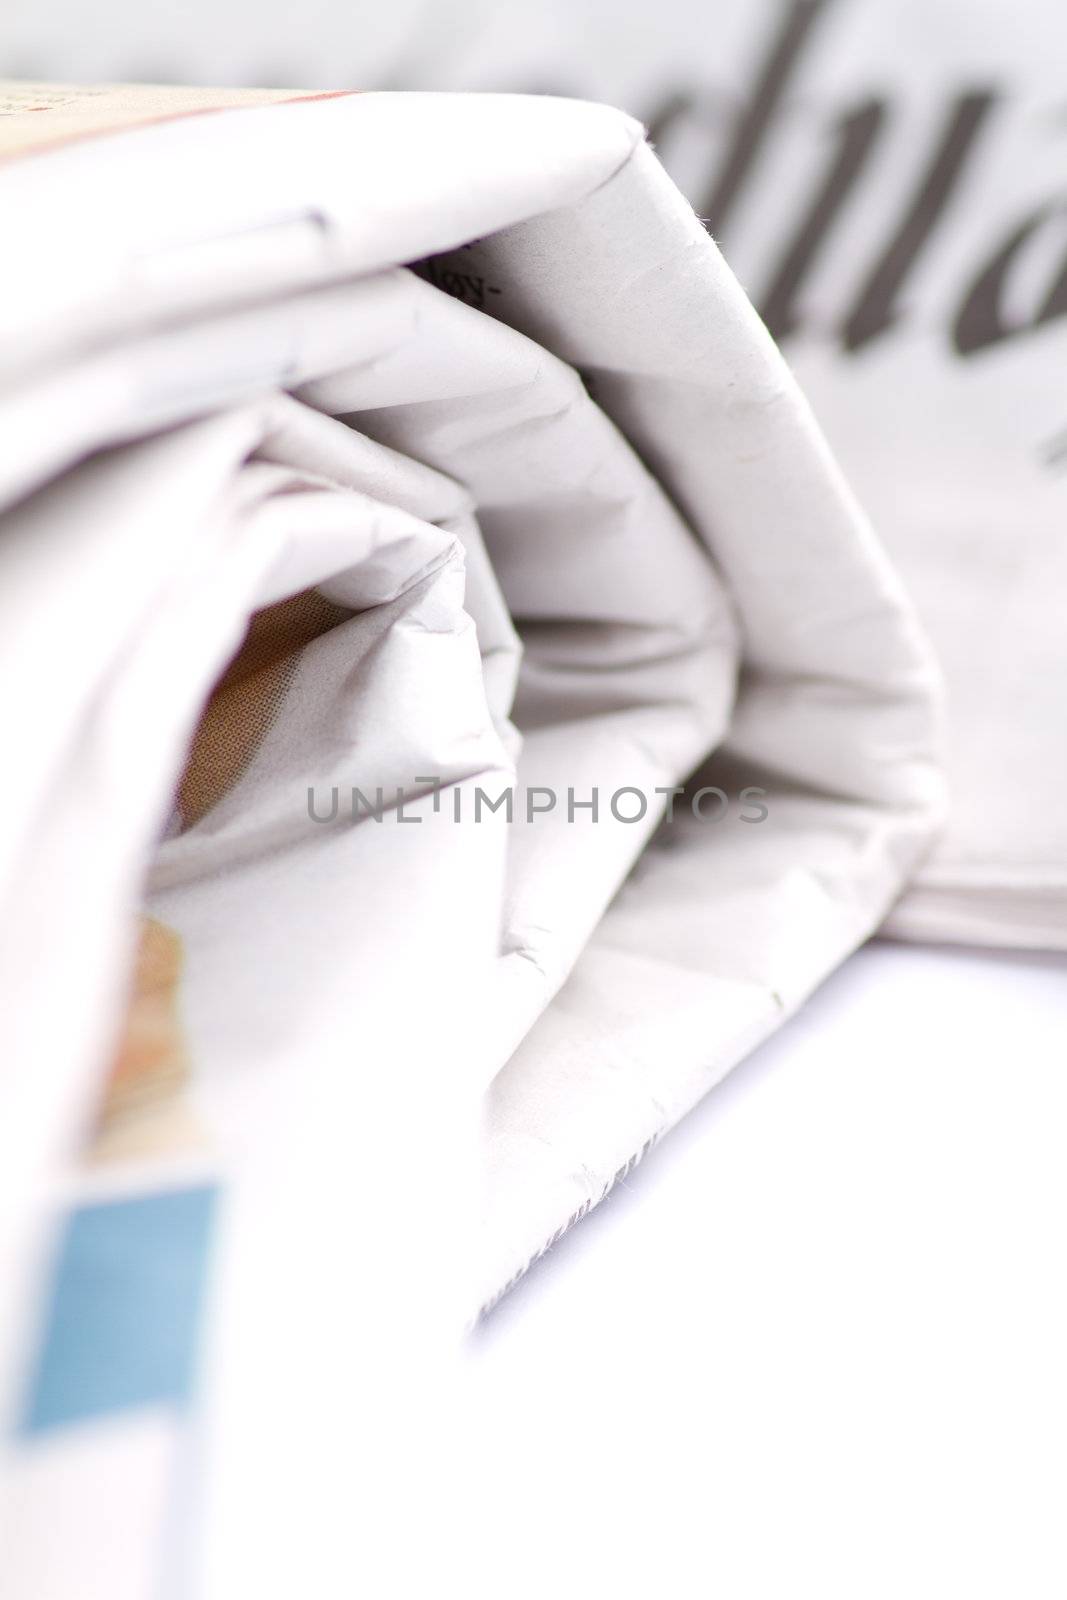 Closeup of folded newspaper isolated on white background.